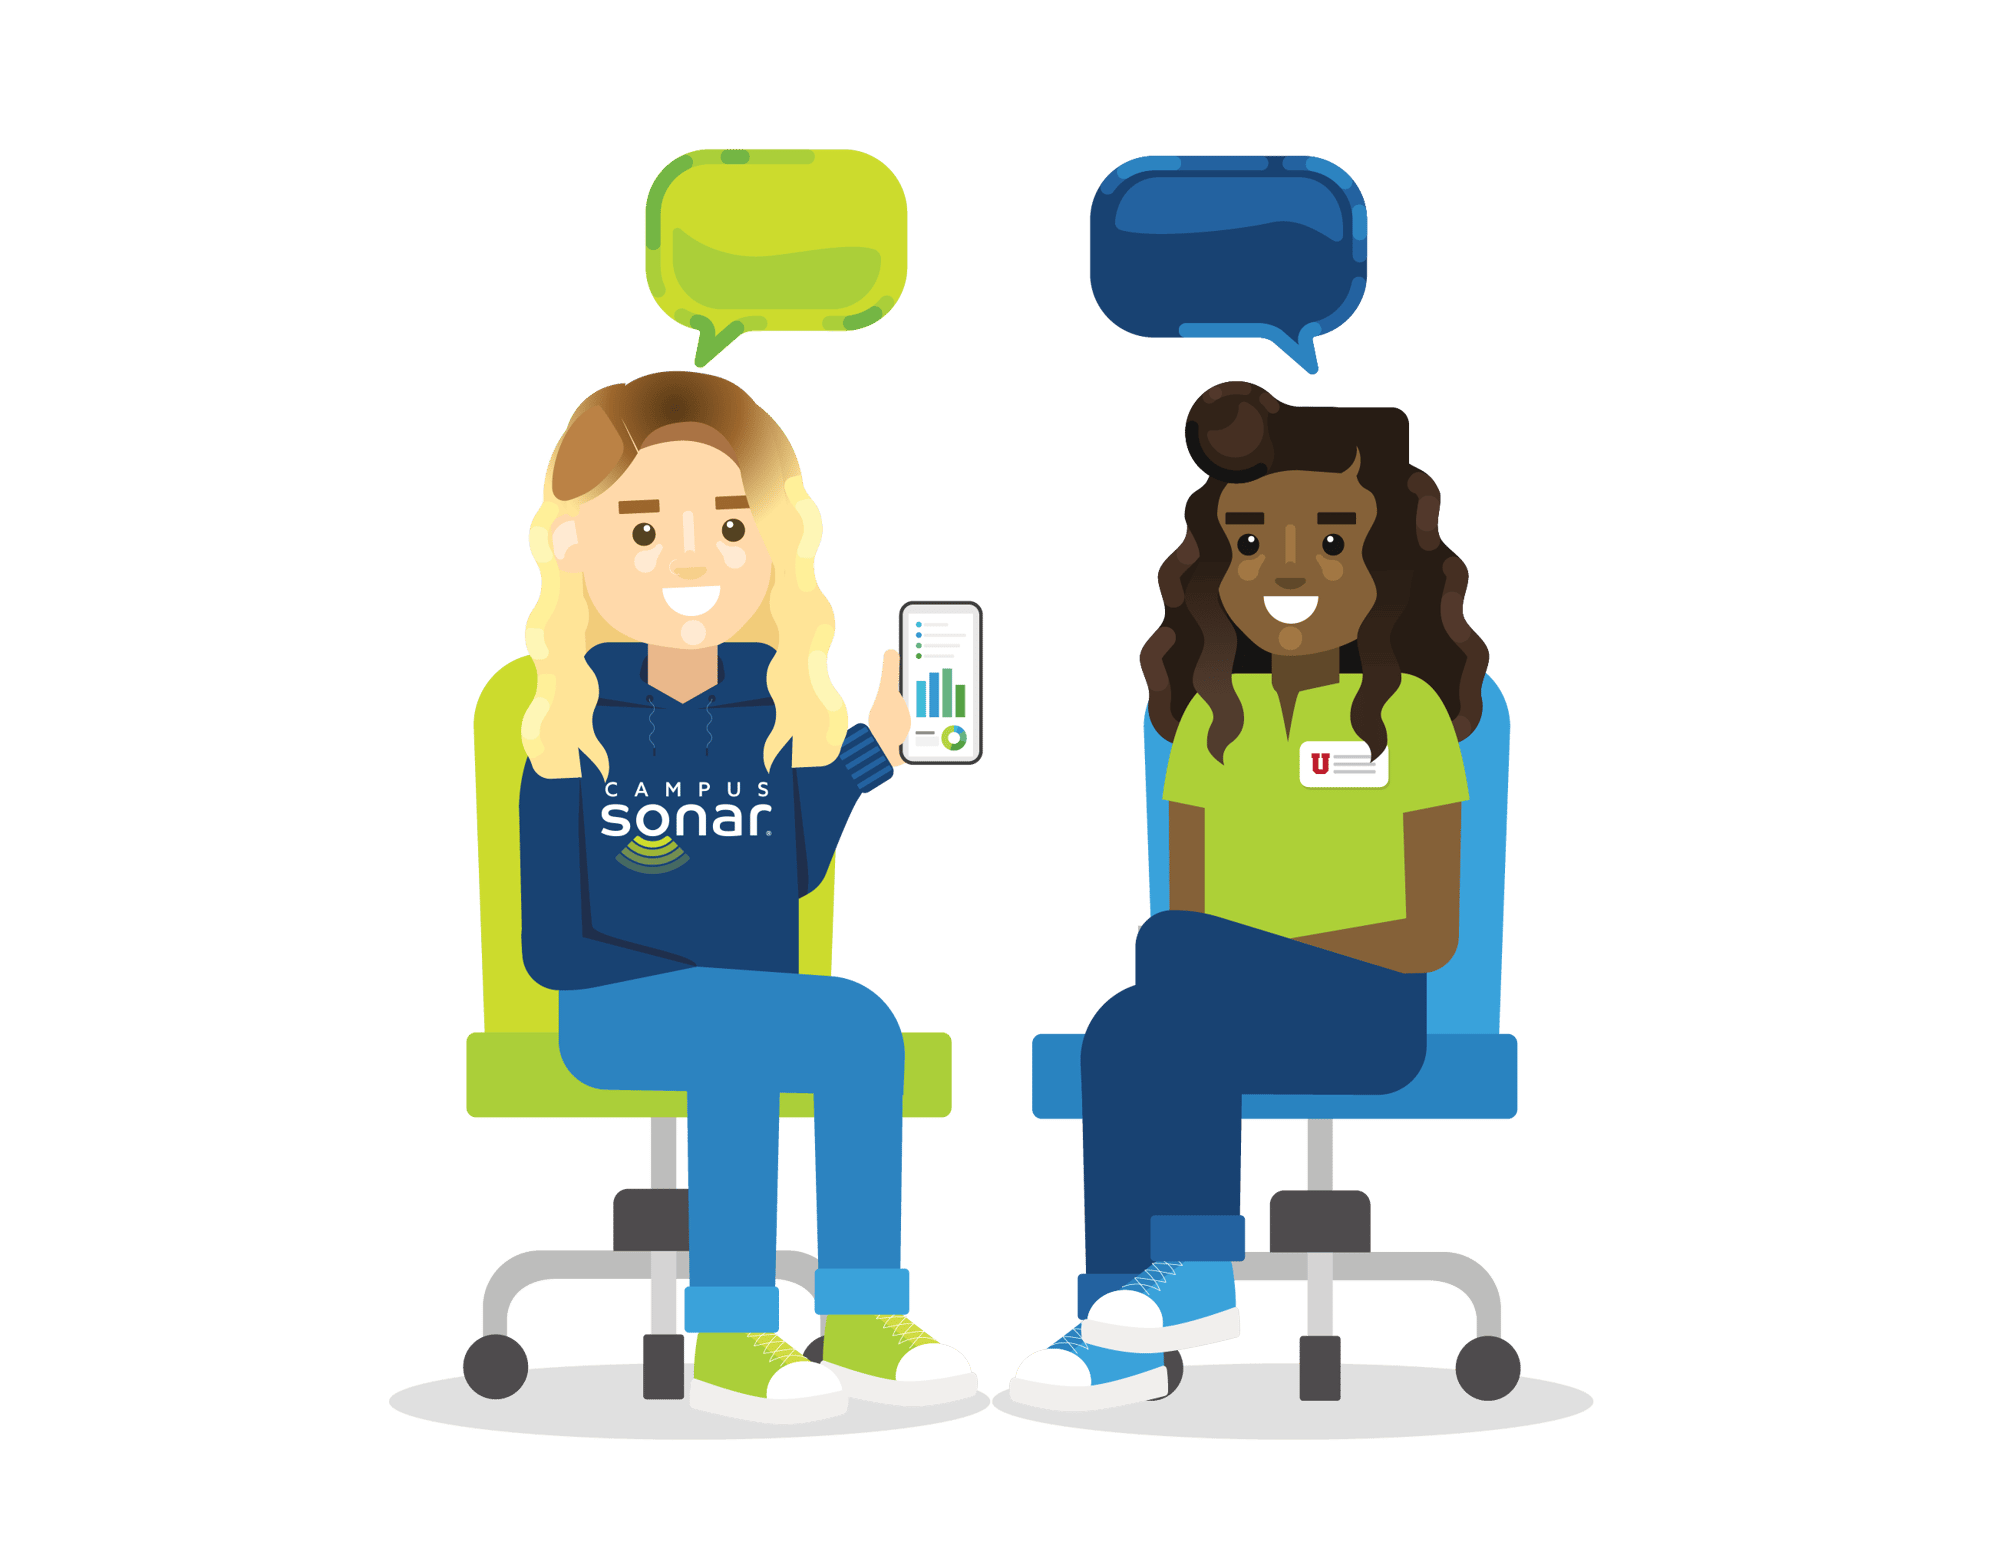 One woman from Campus Sonar holding a mobile phone with a graph and one woman from a campus sitting in office chairs facing each other with speech bubbles